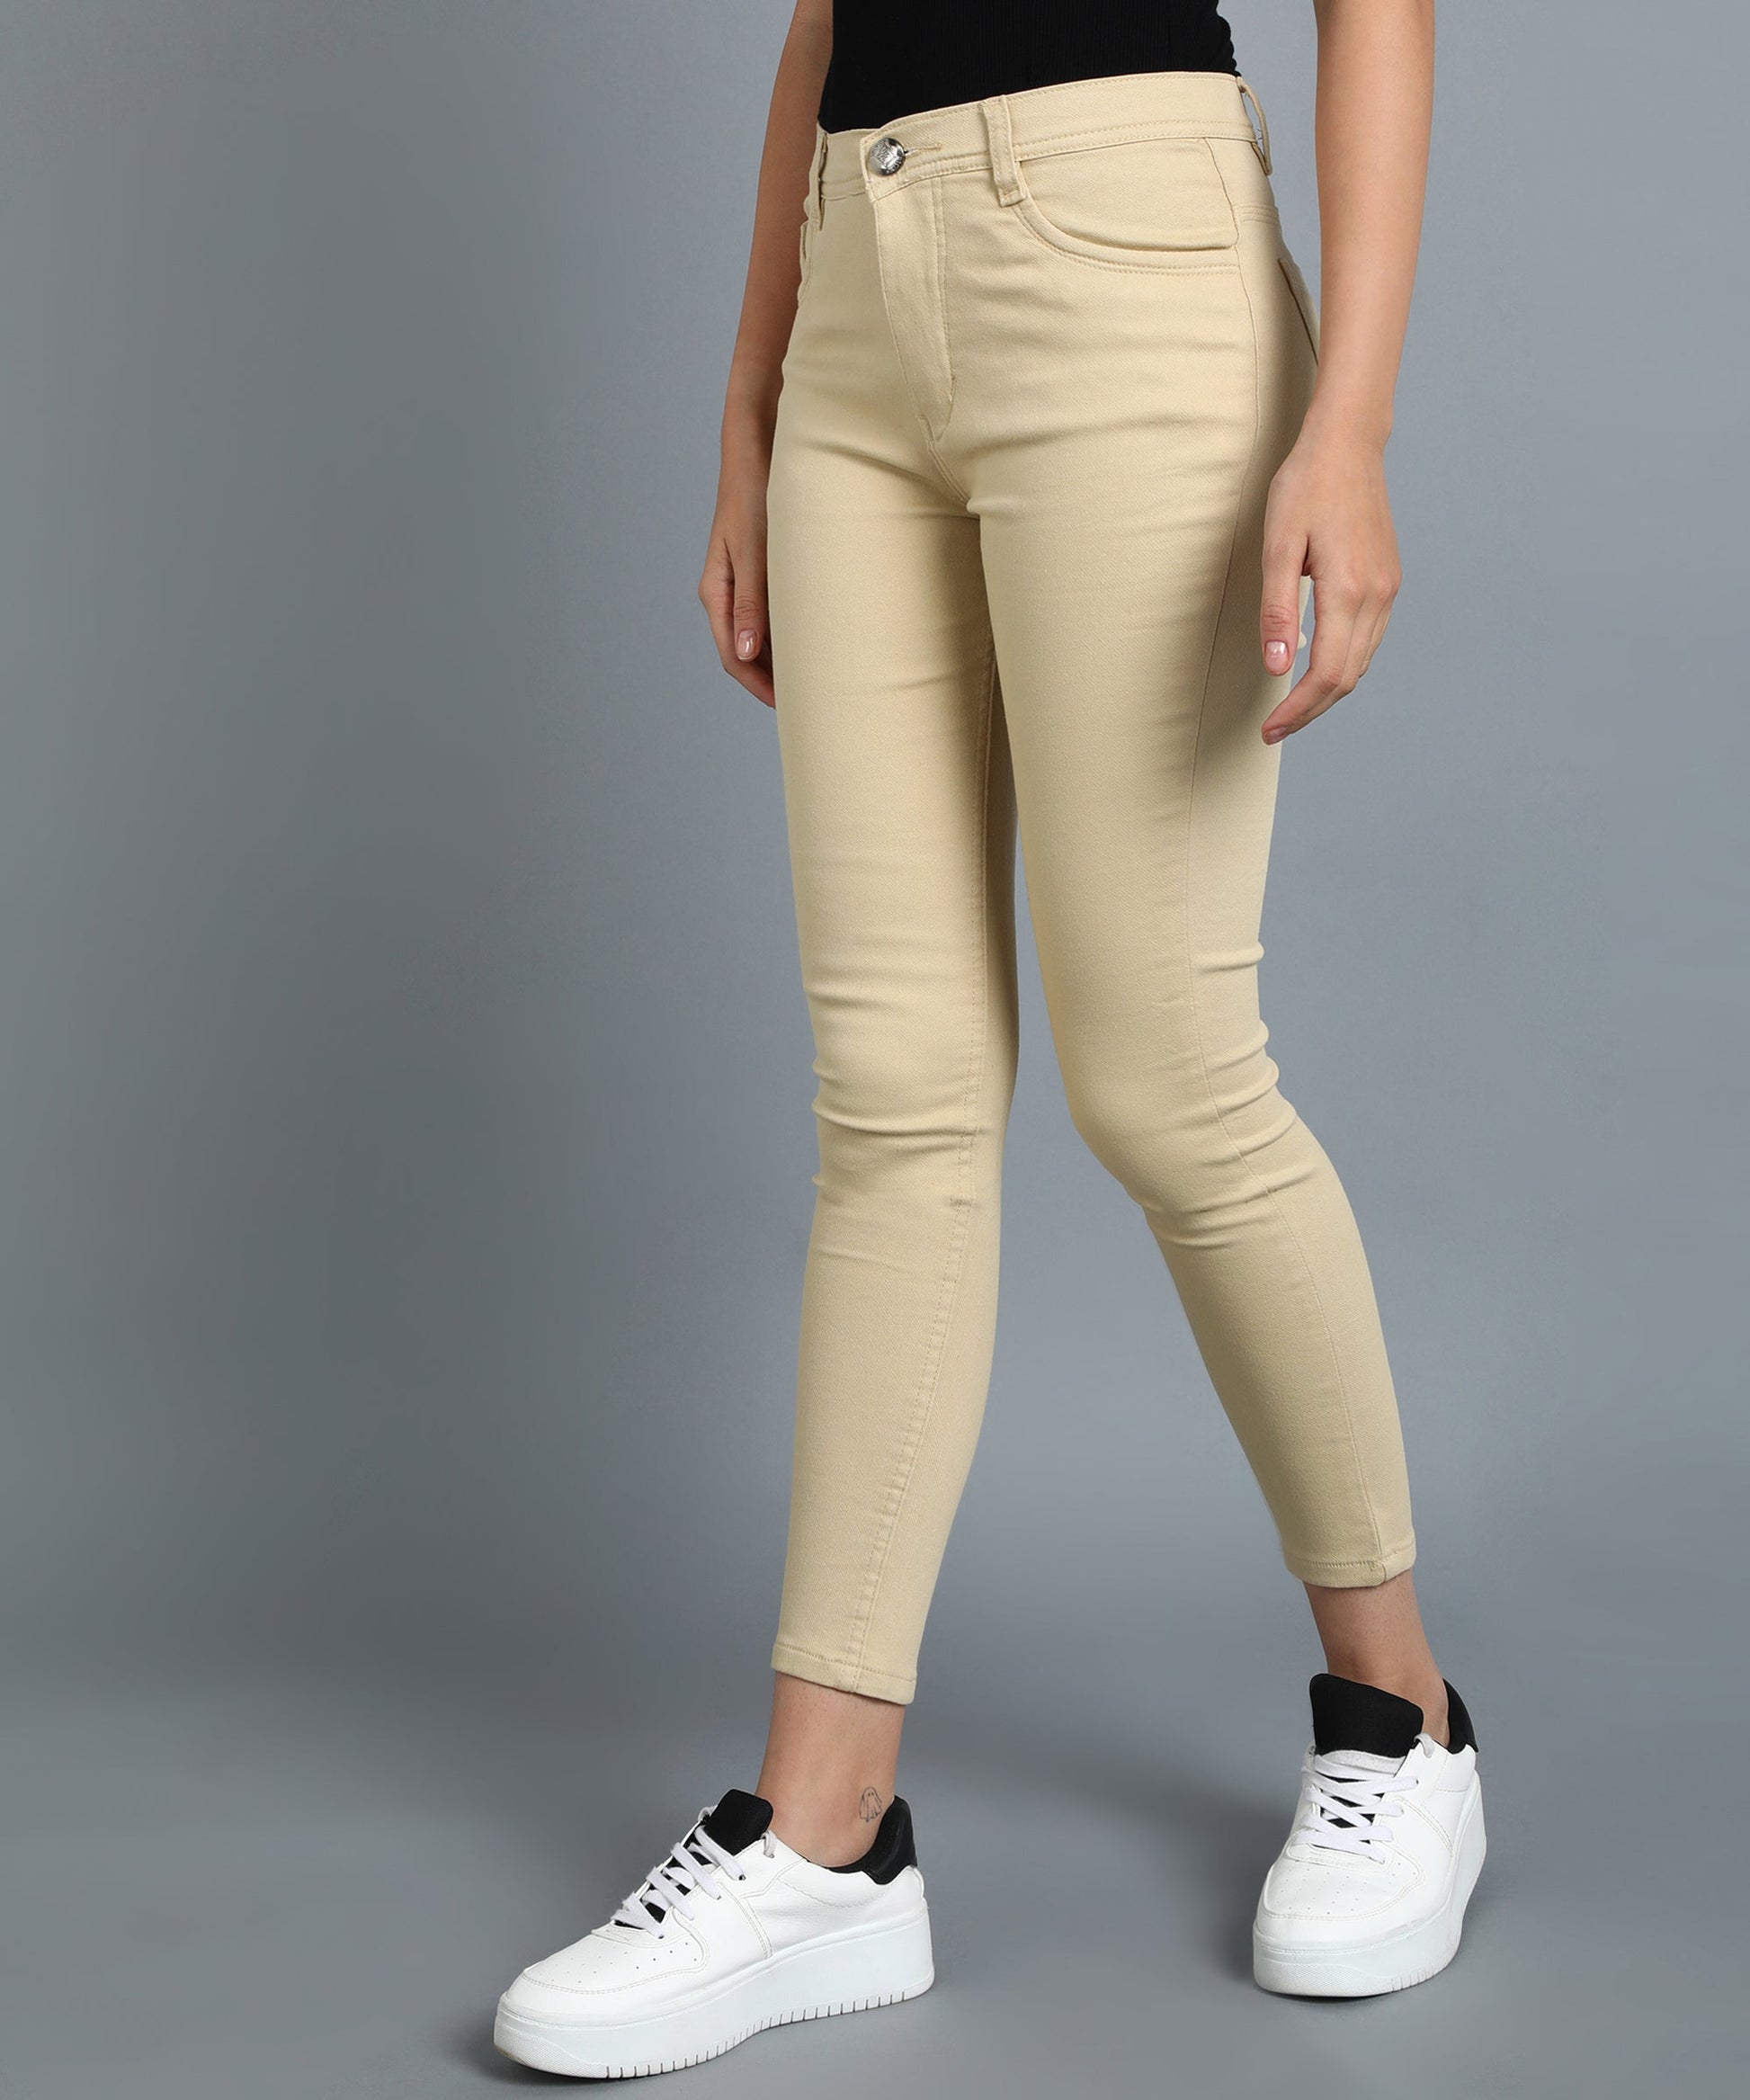 Beige slim fit 5- pocket high rise jeans, clean look, zip fly with button closure, waistband with belt loops